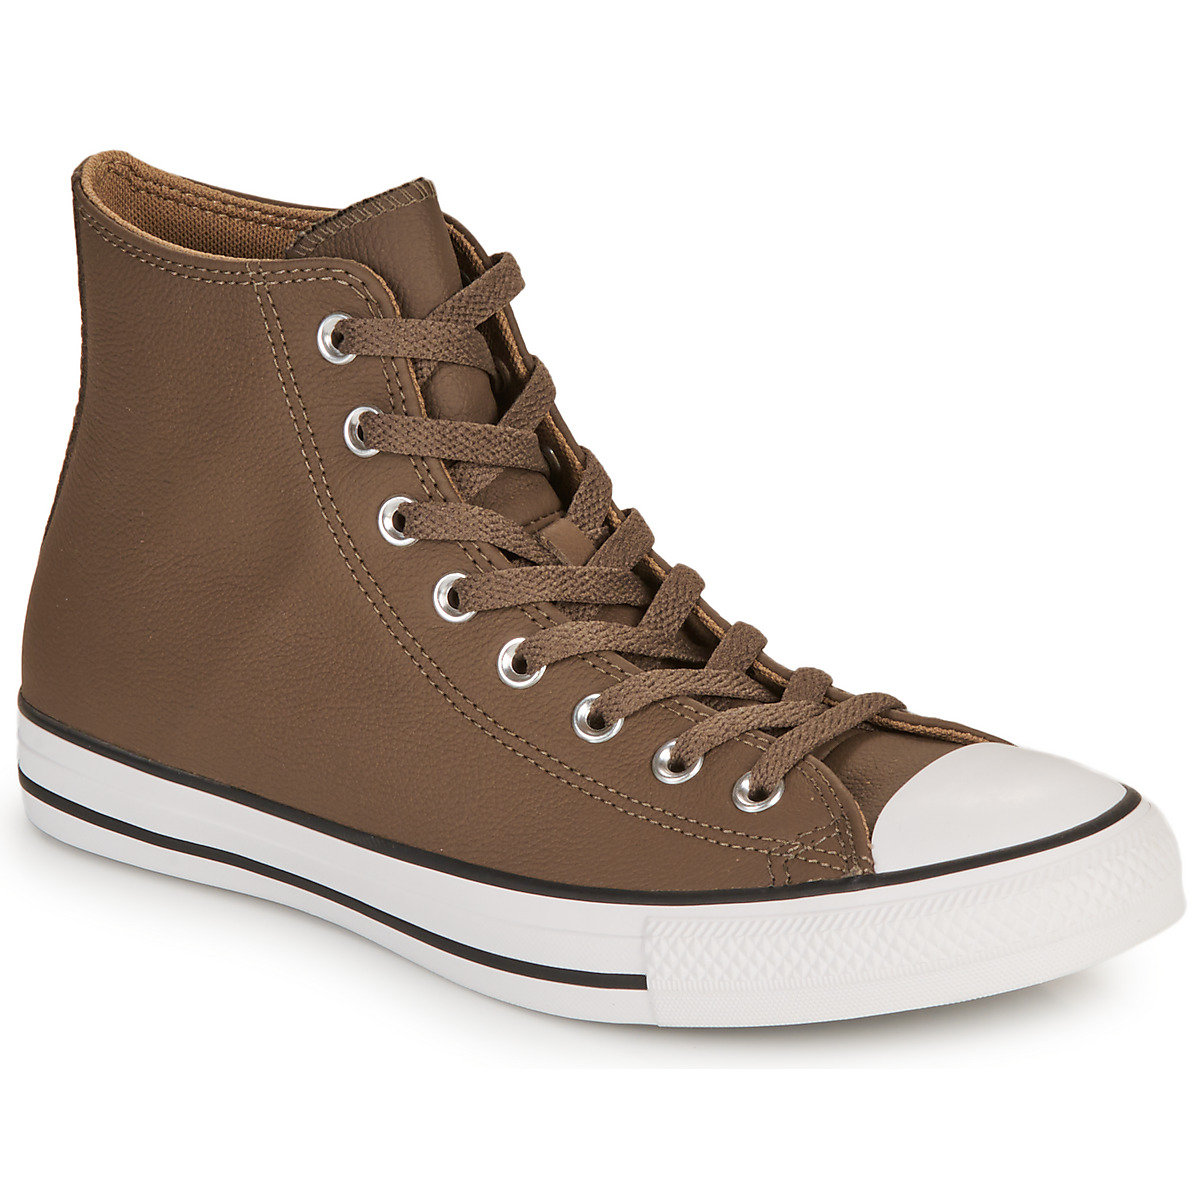 Converse Chuck Taylor All Star Seasonal Color Leather Brown